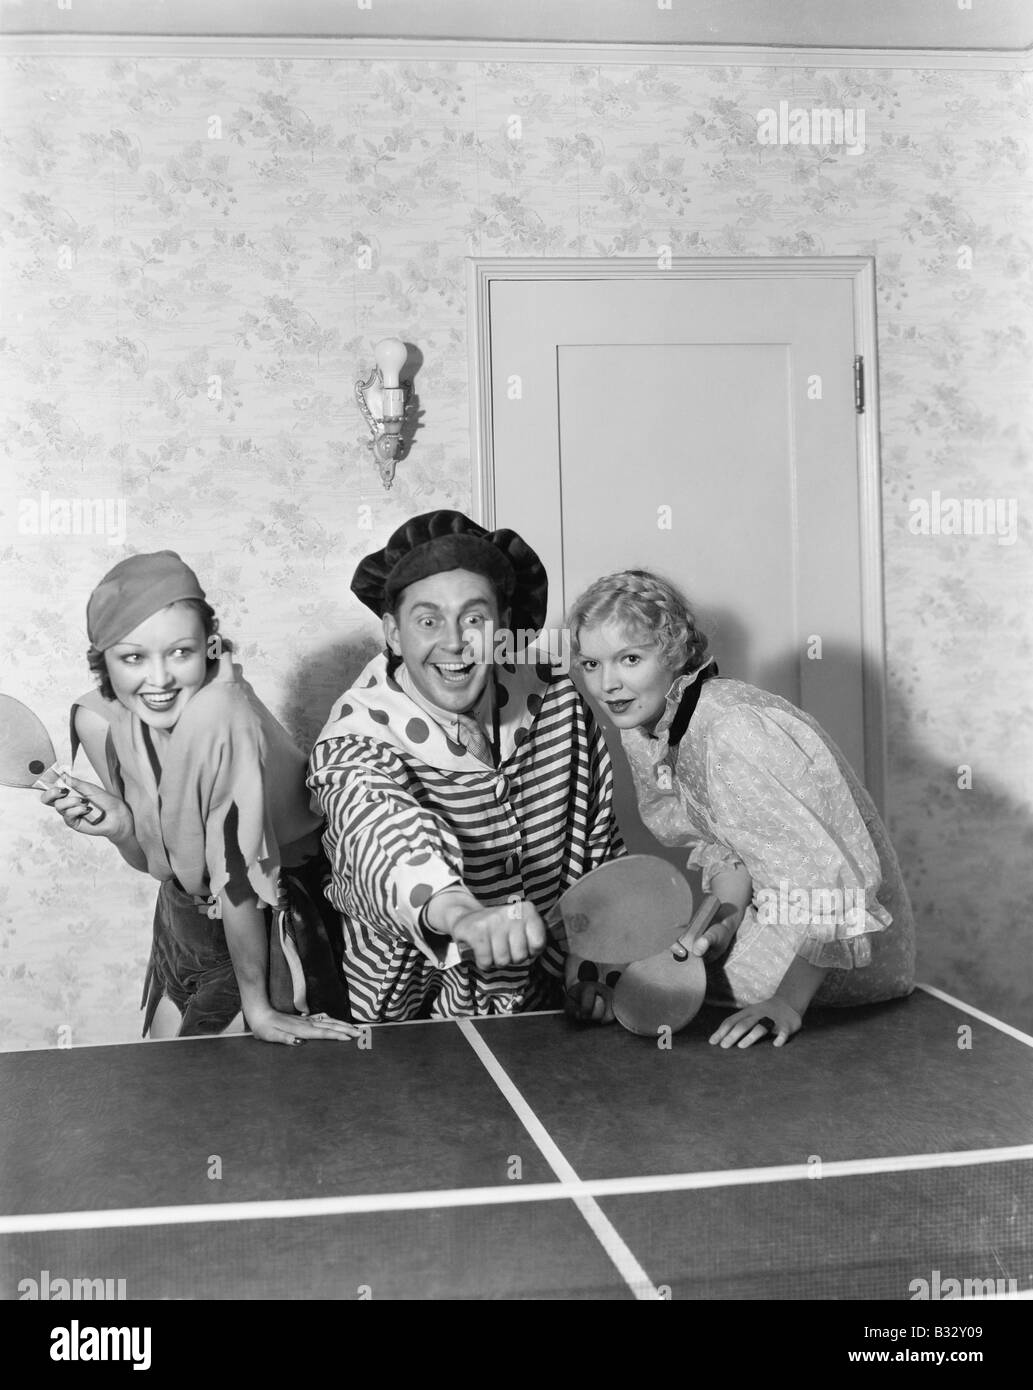 Two women and one man in a costume playing table tennis Stock Photo